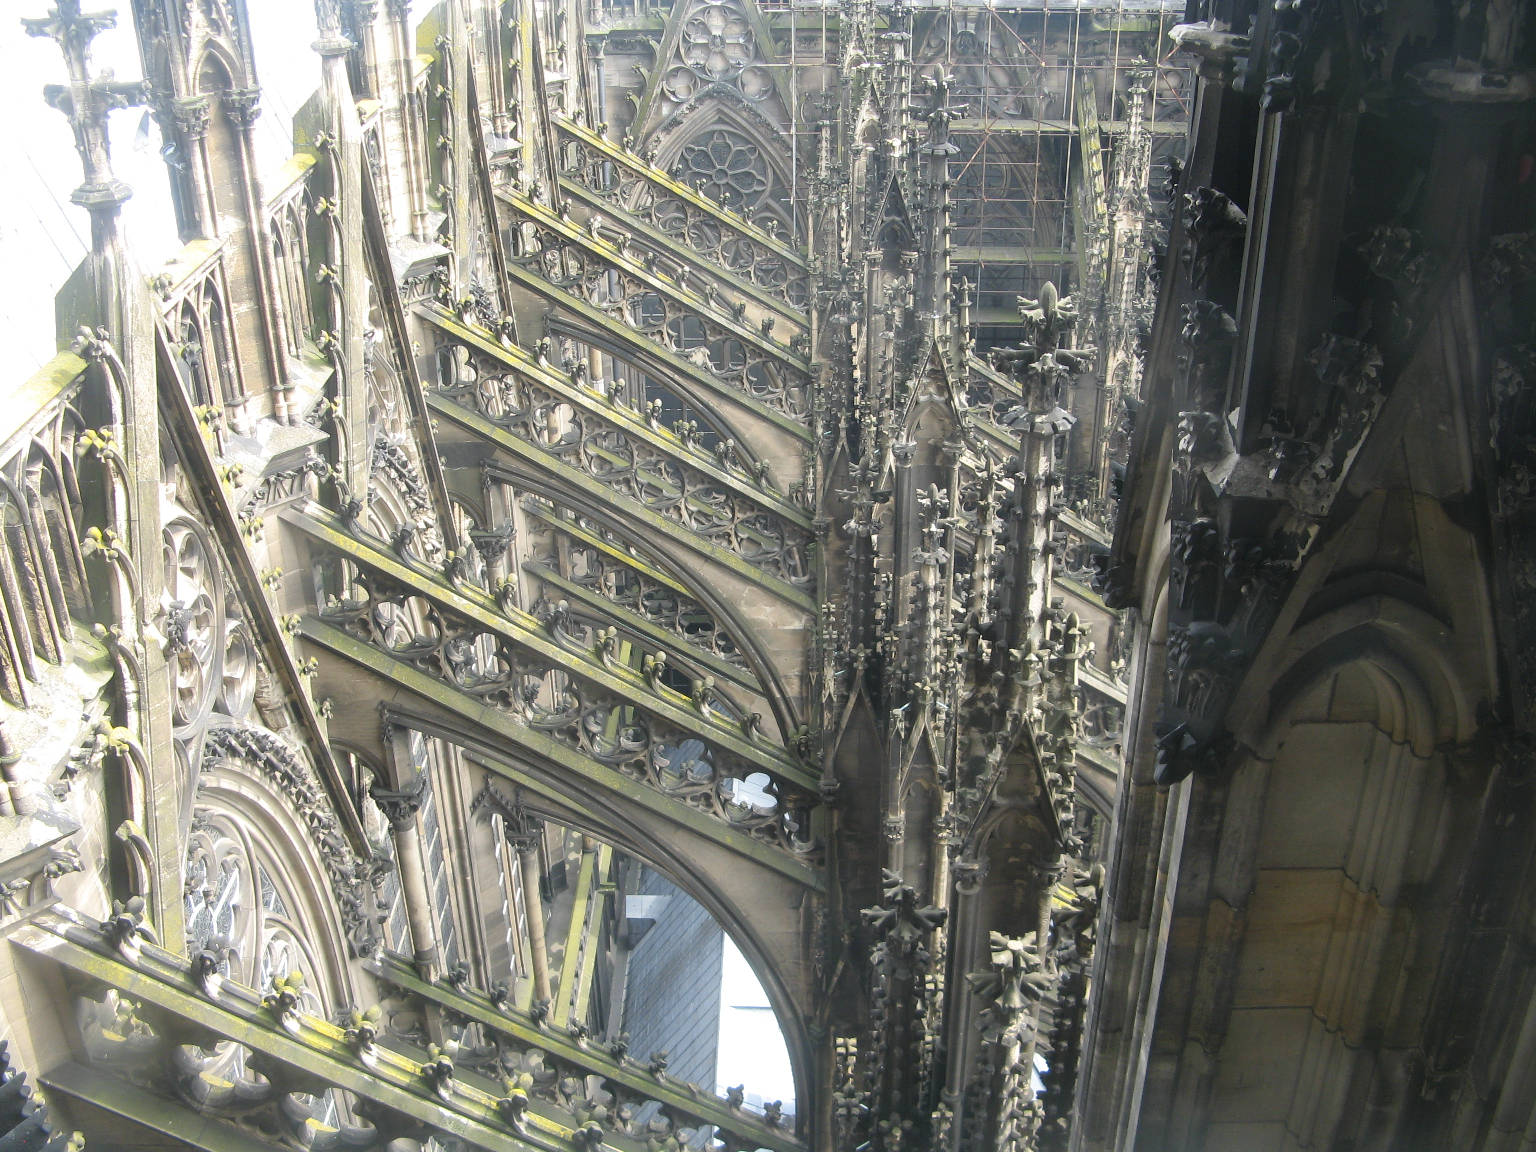 Buttresses flying down the side of the Cathedral